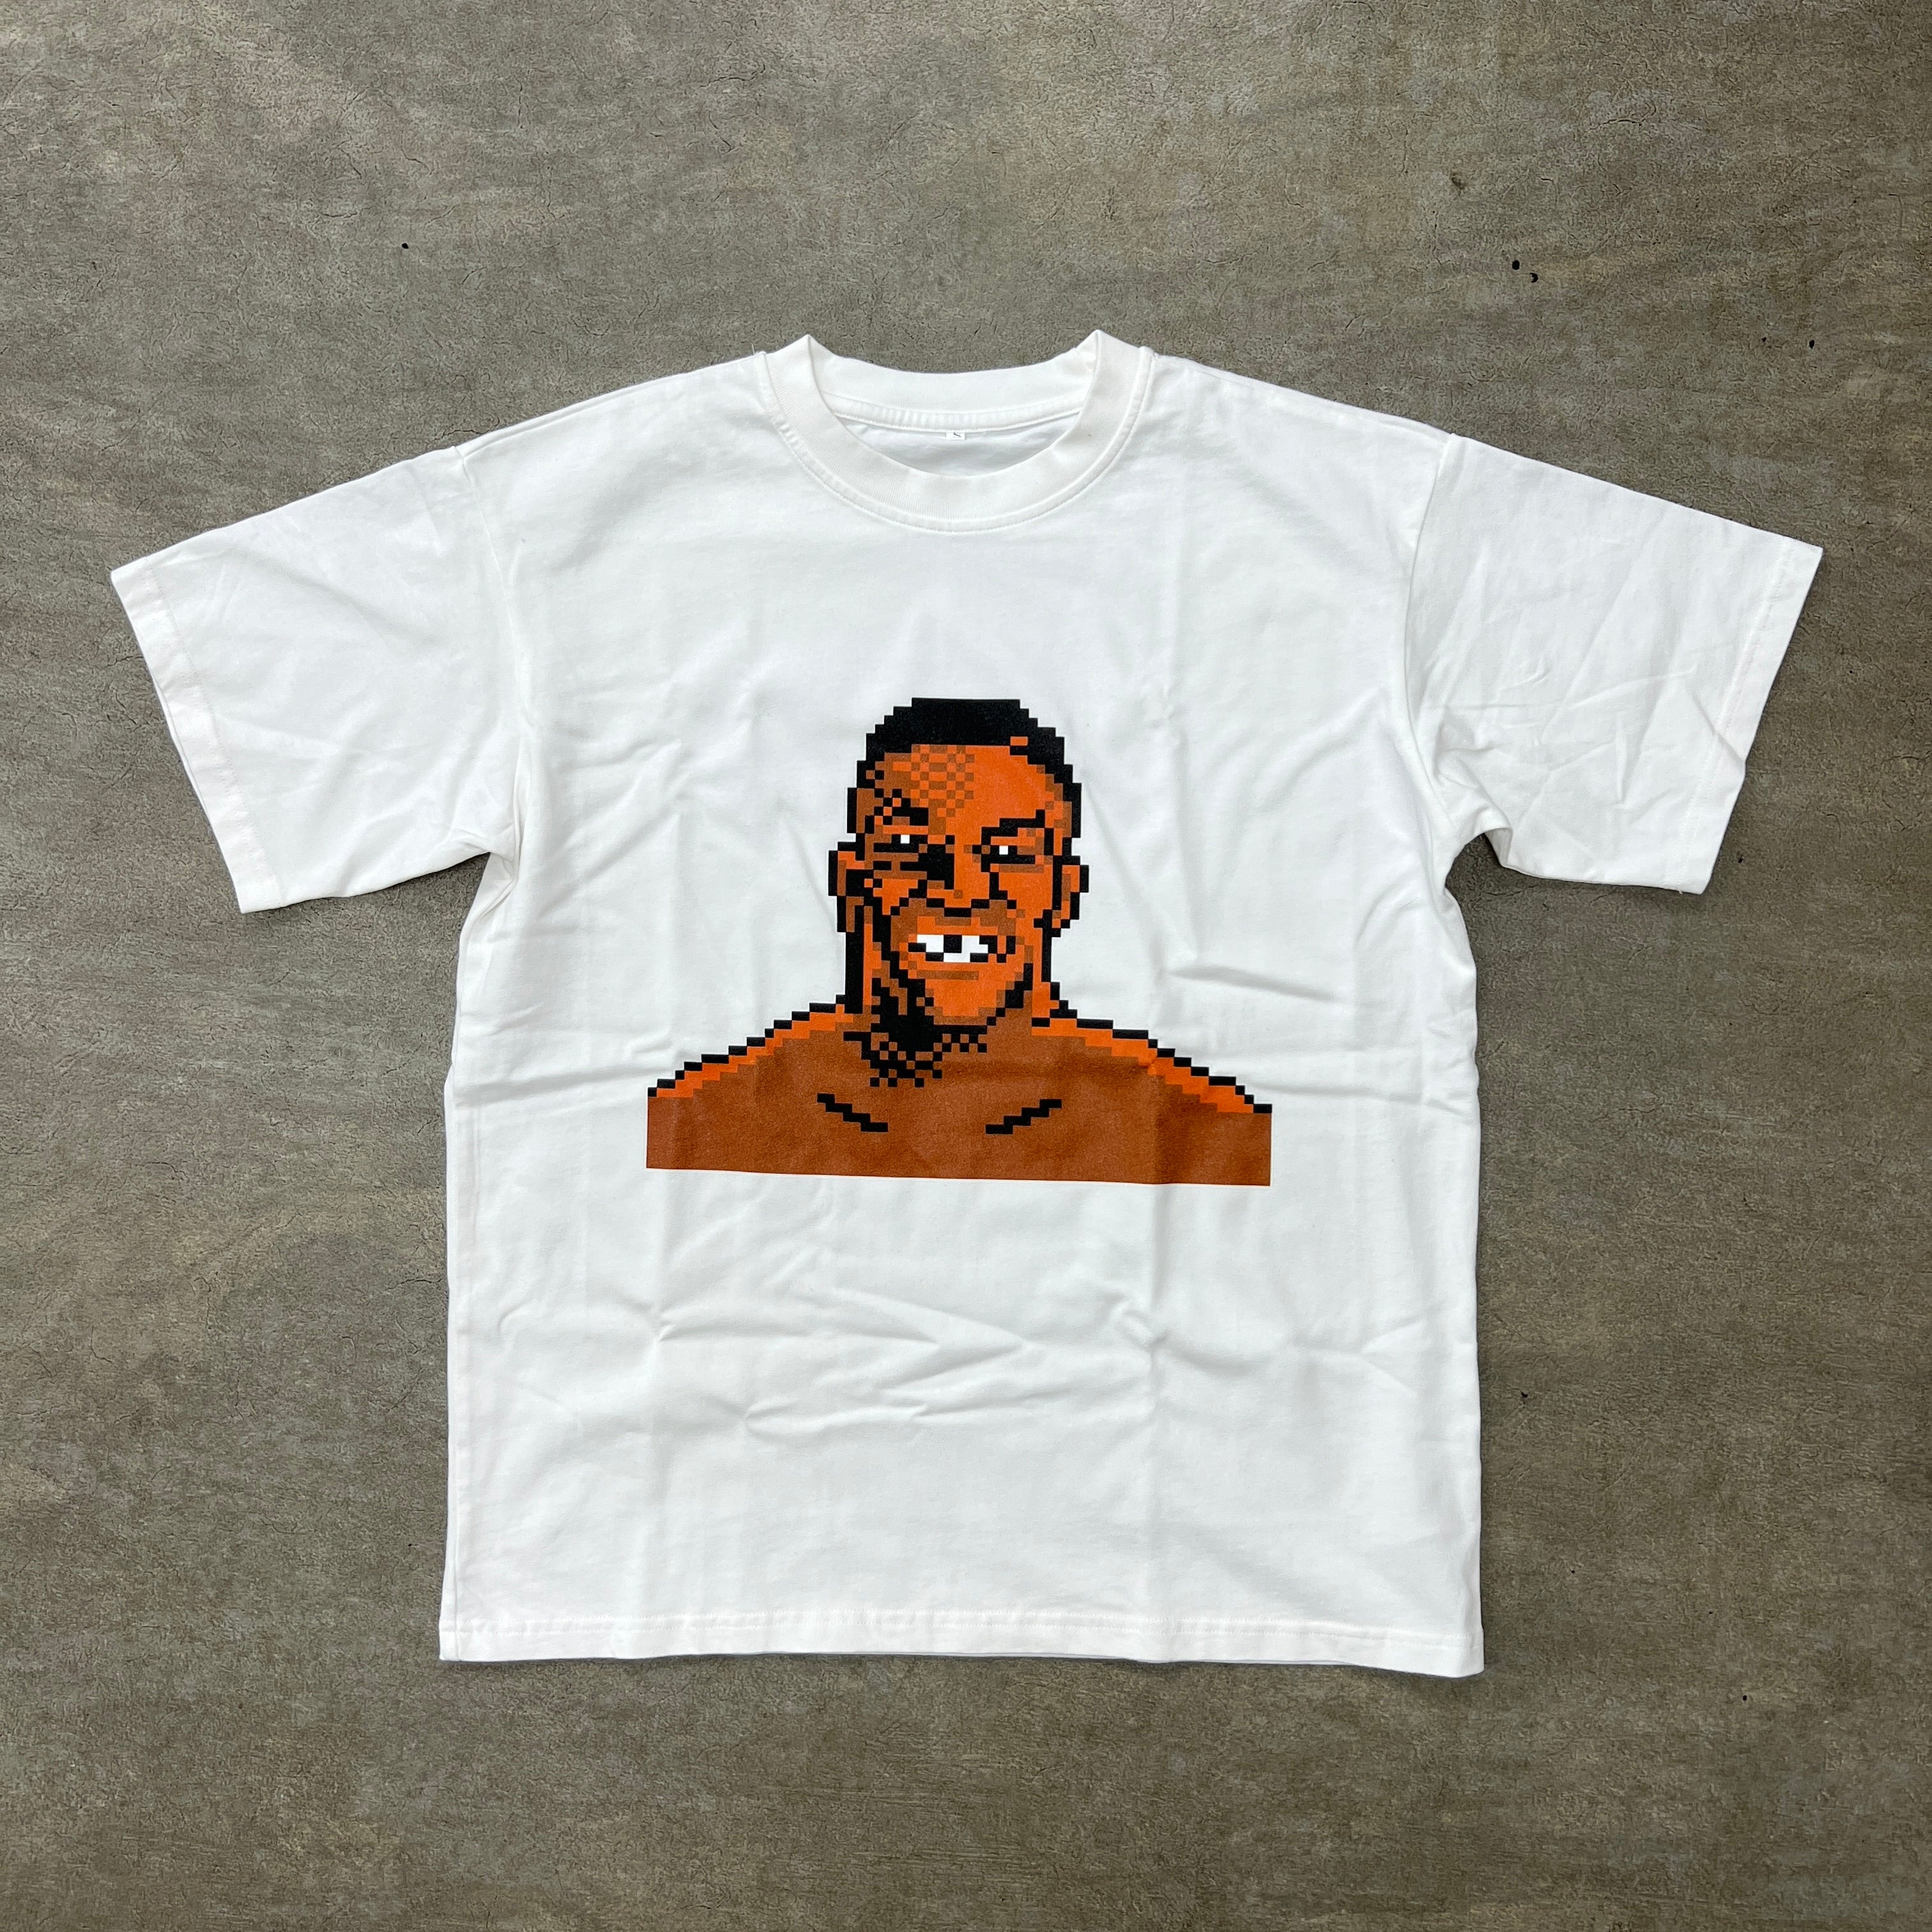 Soled Out T-Shirt &quot;MIKE TYSON&quot; White New Size S